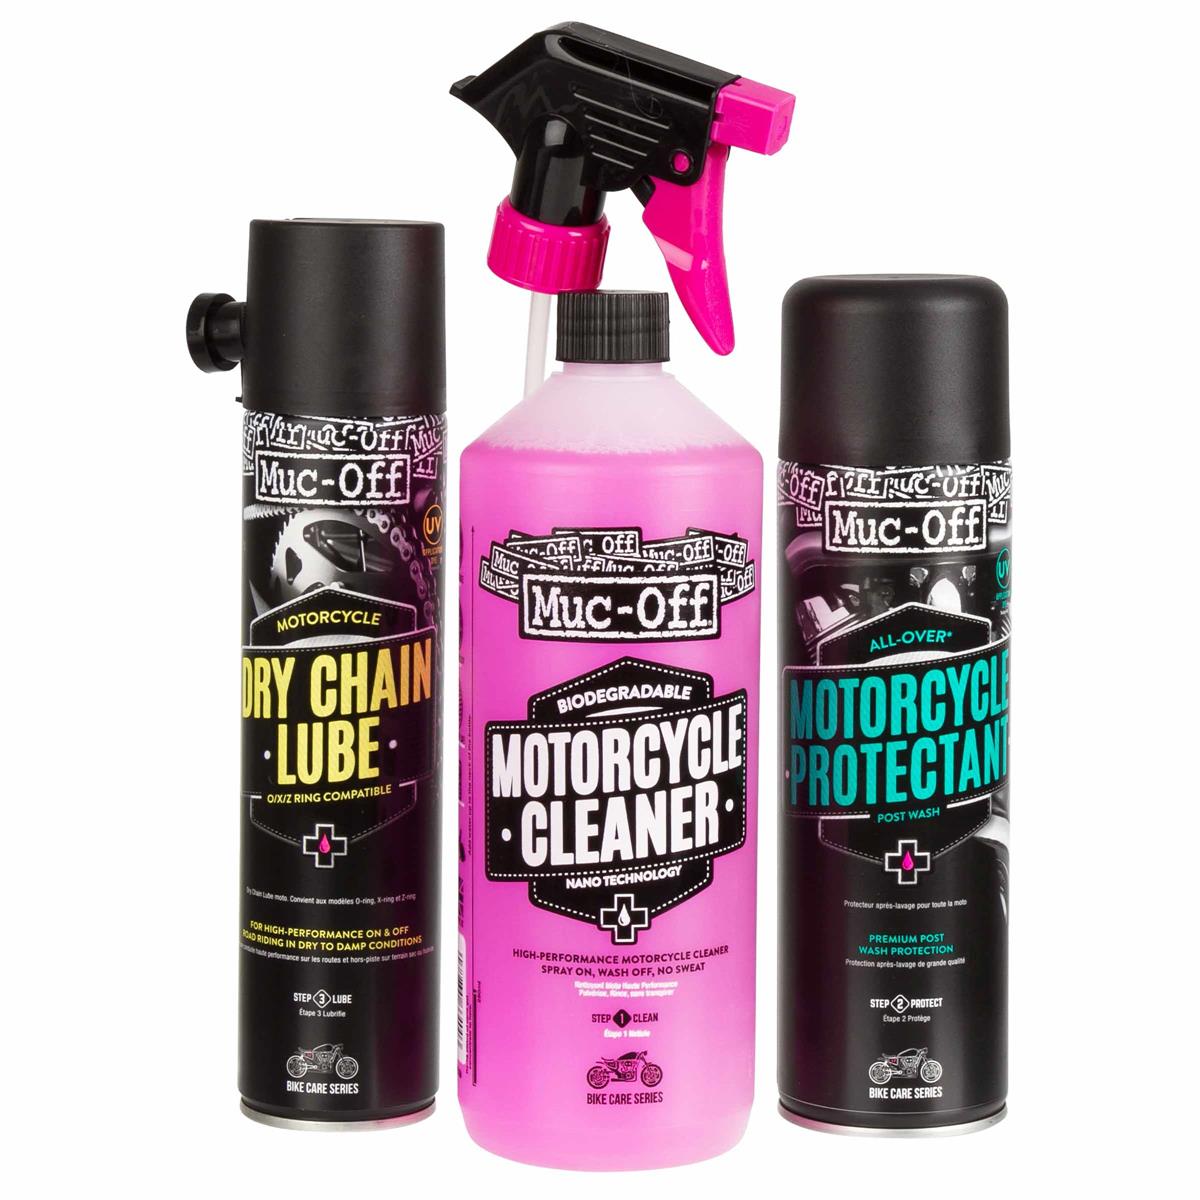 Muc-Off Motorcycle clean protect set  3 pieces